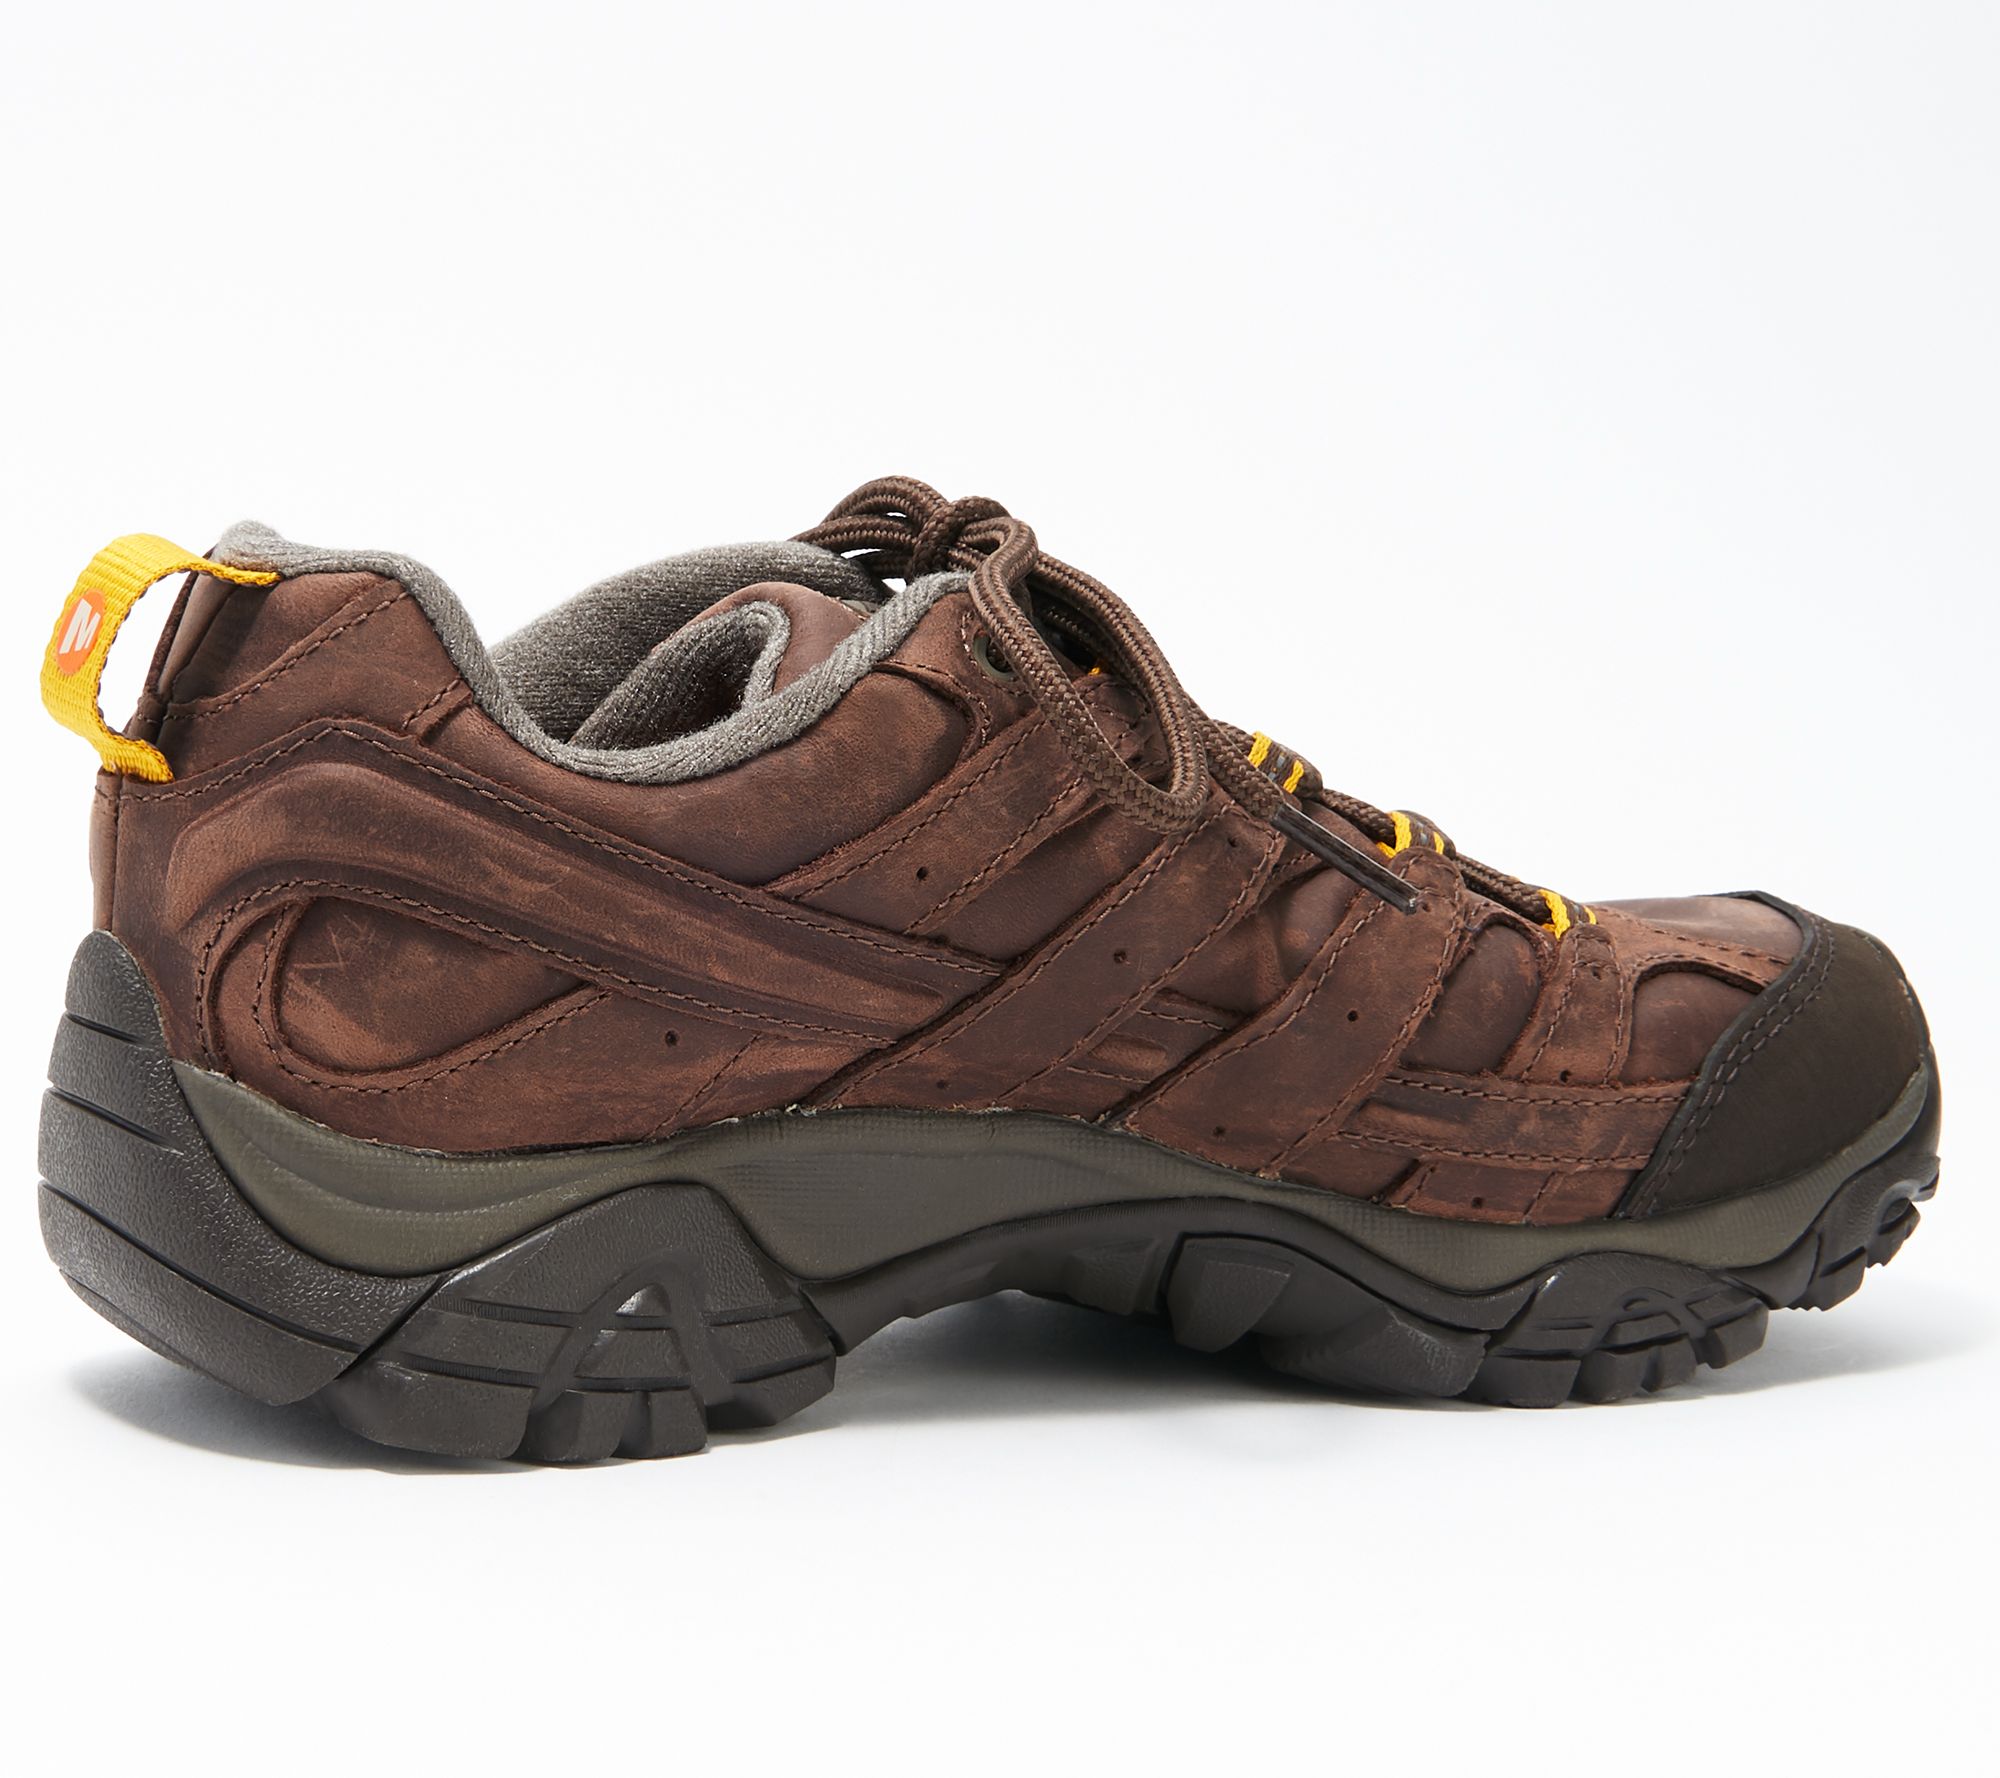 Merrell Leather Lace-Up Hiking Sneaker - Moab 2 Prime - QVC.com